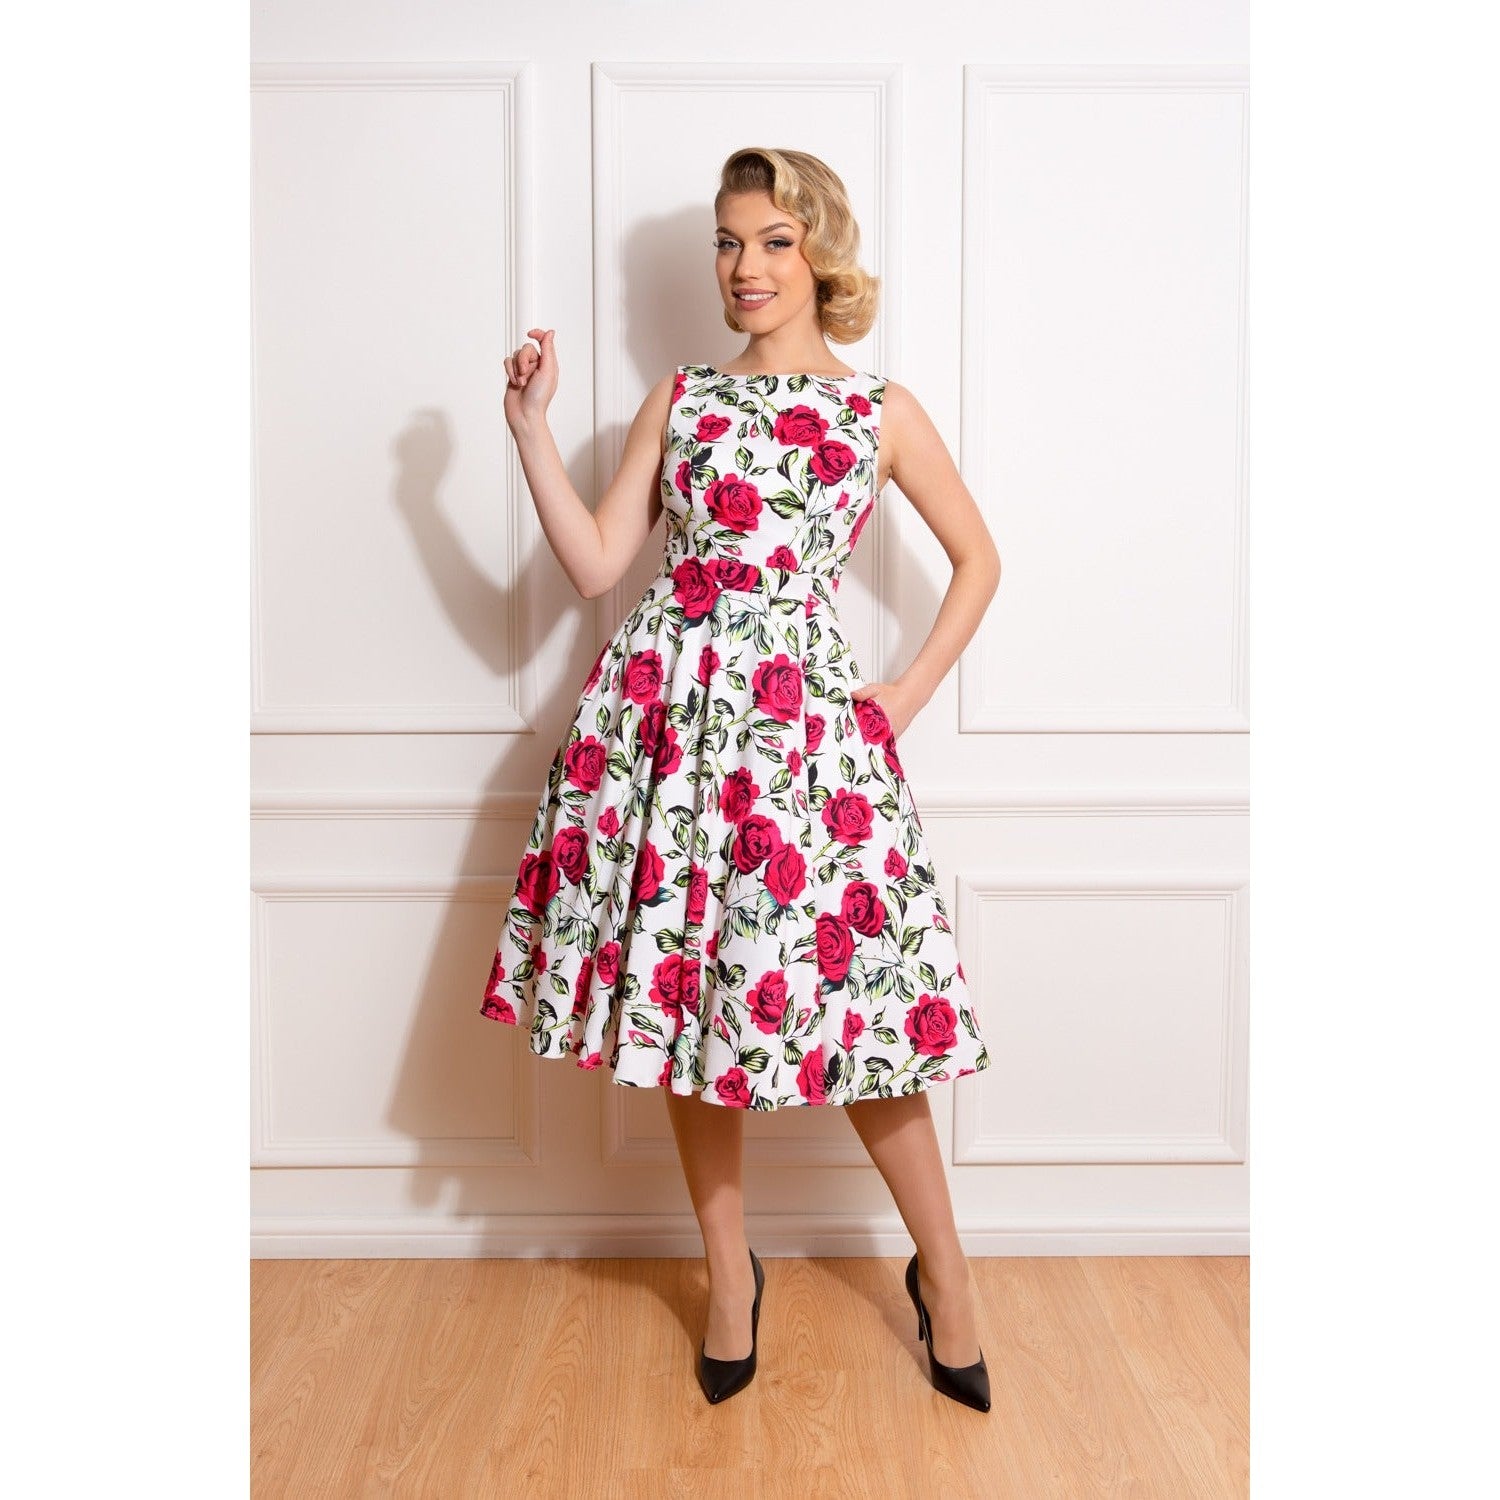 White Rose Floral Audrey Rockabilly 50s Swing Dress